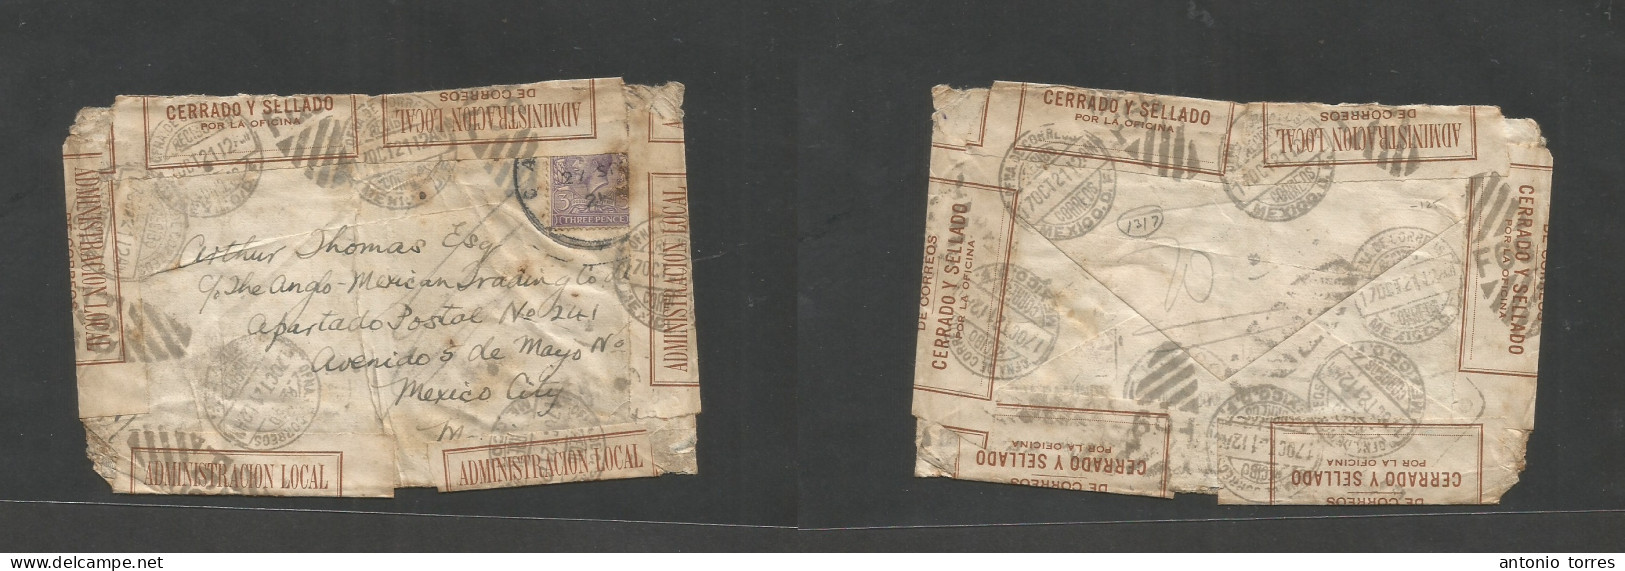 Mexico - Xx. 1921 (27 Sept) GB - DF (7 Oct) 3d Lilac Fkd Env. Arrived Opened At Edges And Sealed By Mexican Post Office - Mexiko